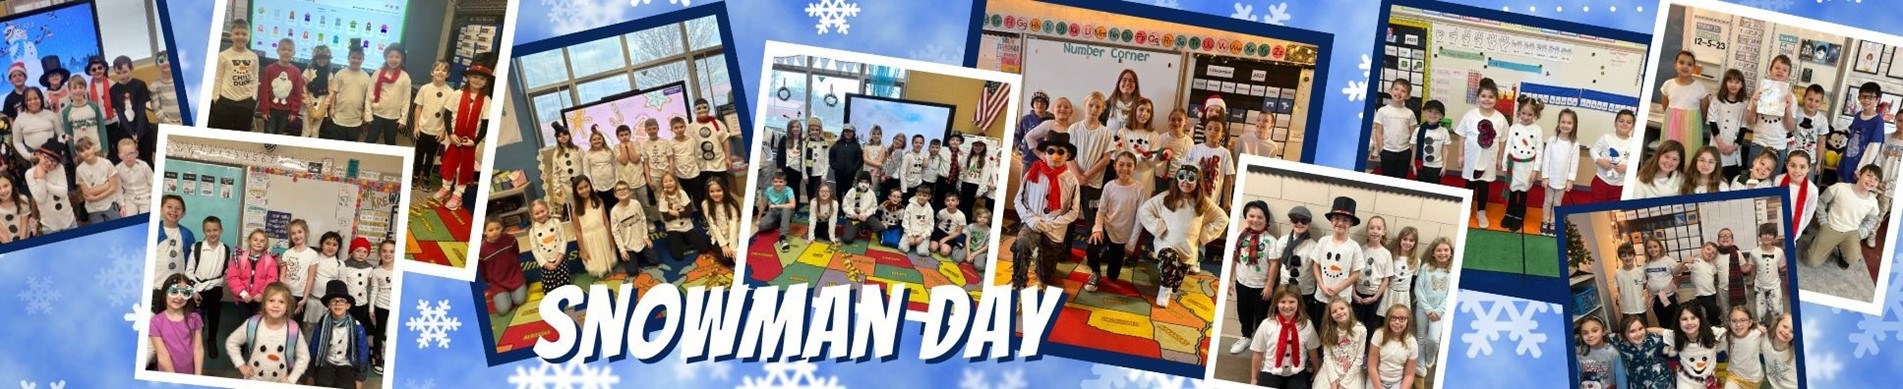 Students dress up for Snowman Day!